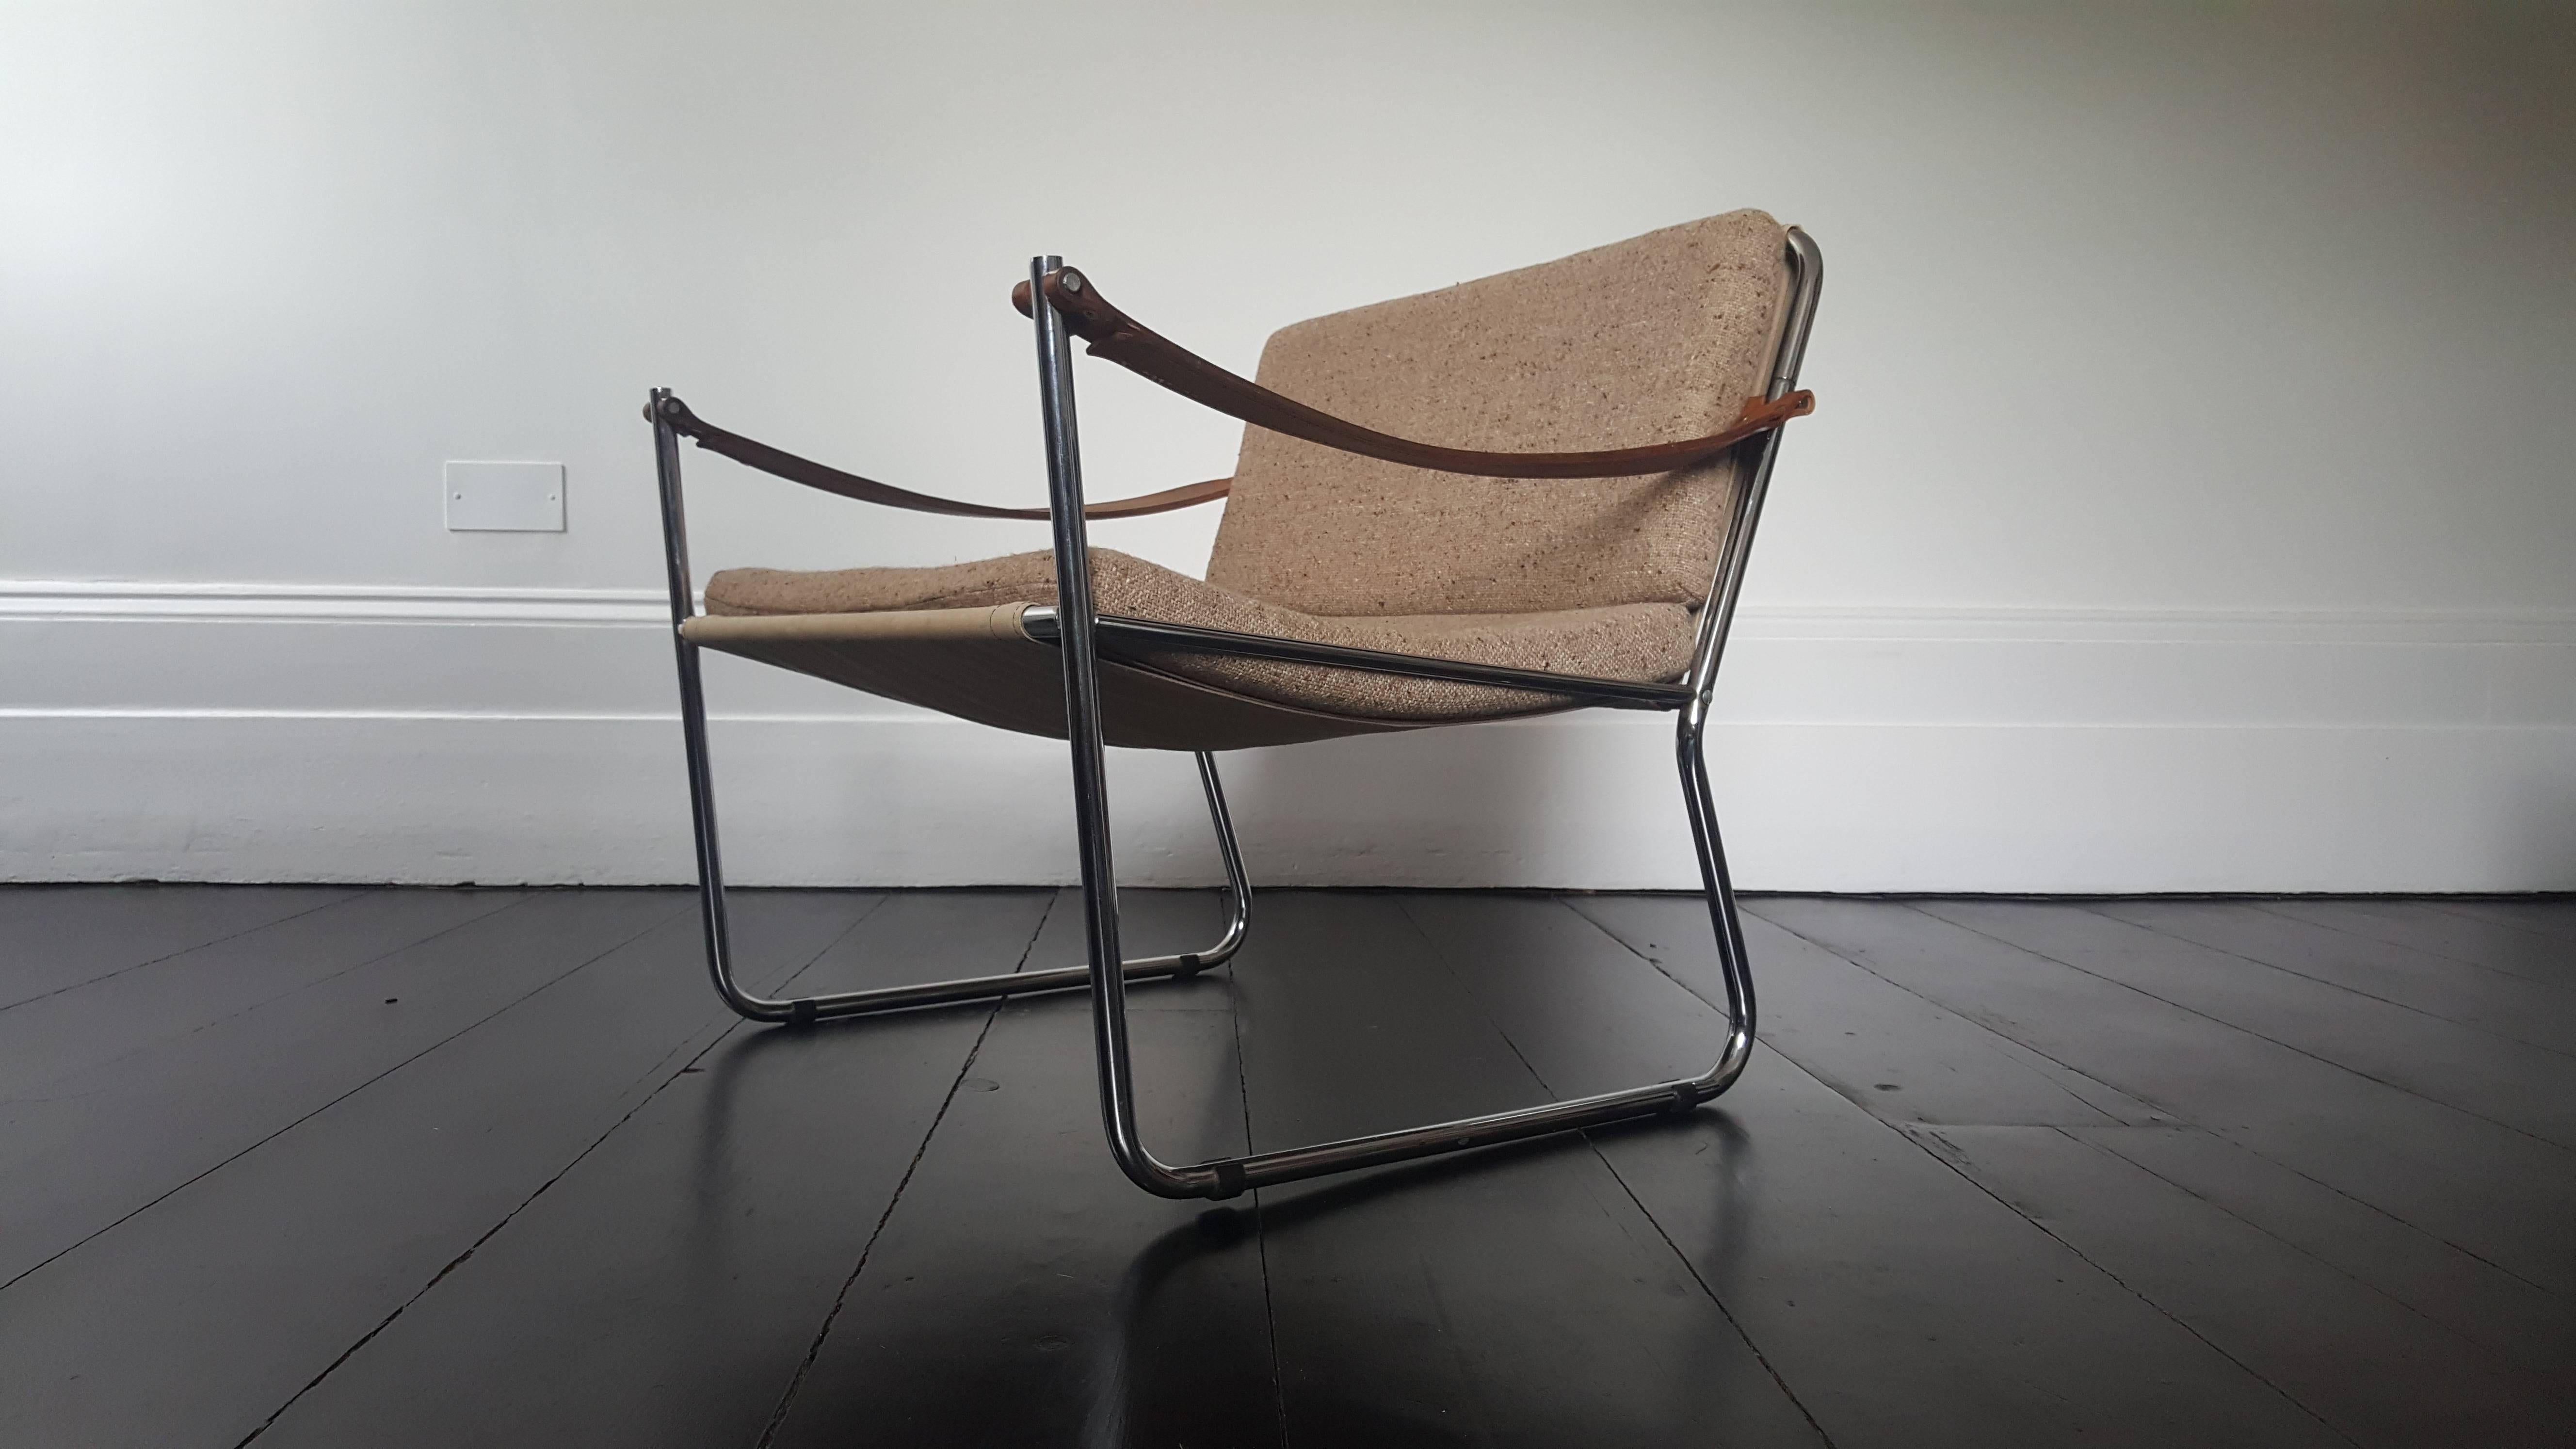 Scandinavian Furniture design, 1960s.

Featuring chrome-plated steel frame with stretched canvas and light brown upholstered cushions and suspended leather strap arms.